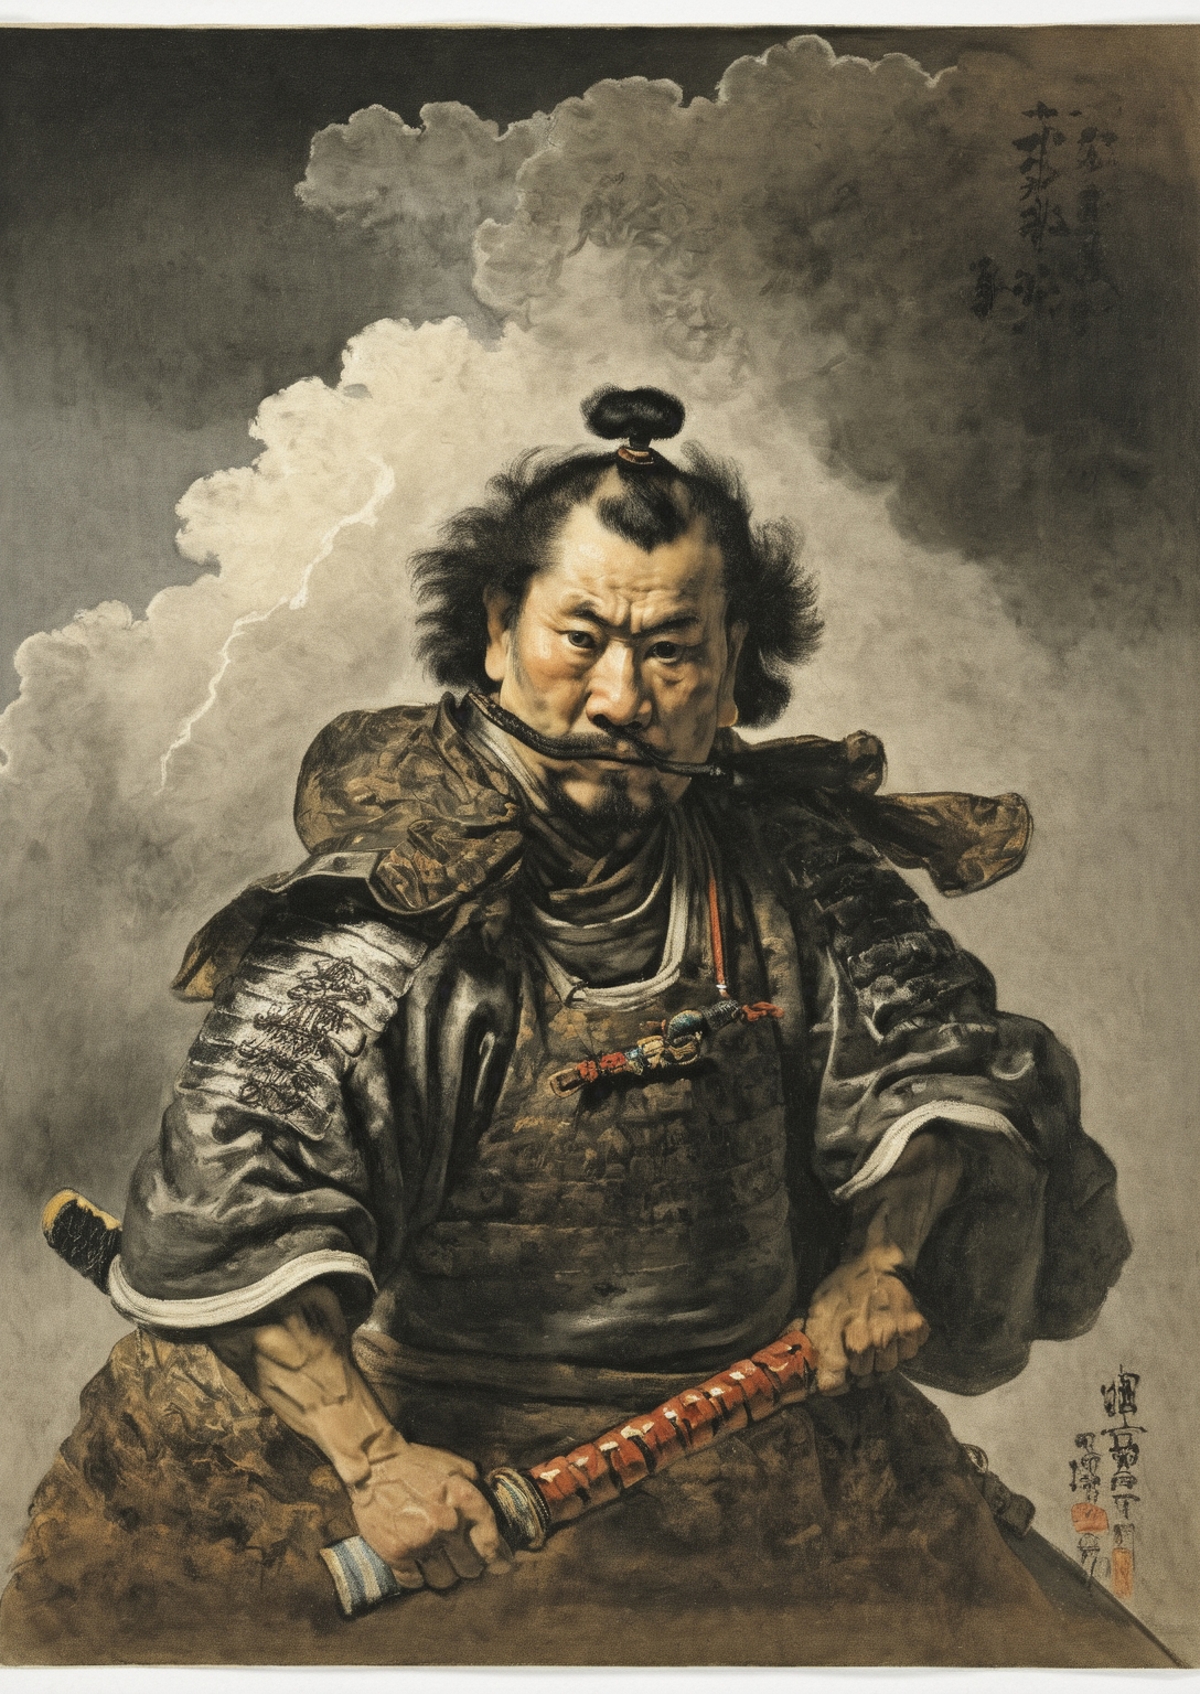 Man in Samurai Armor with a Sword and Bow - Painting